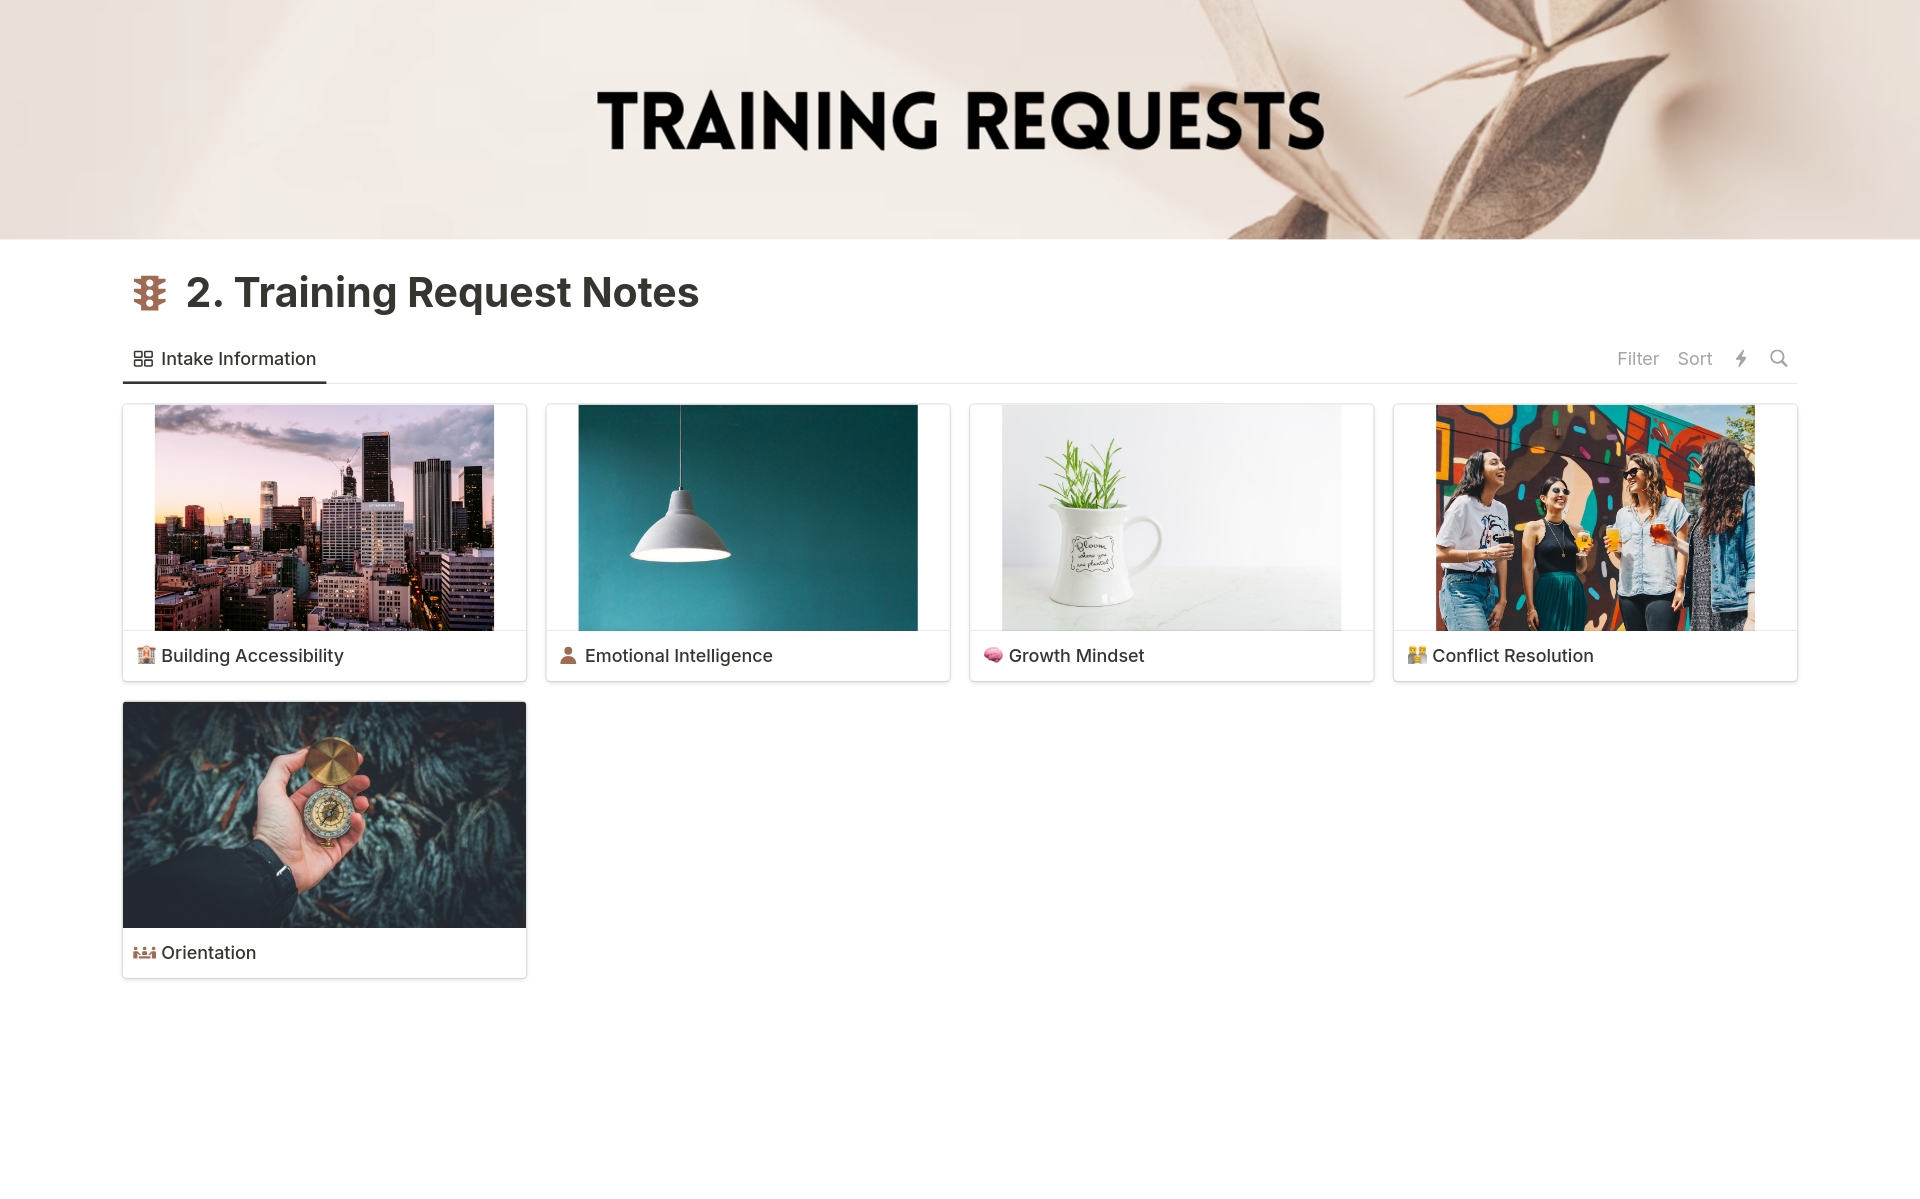 Our intuitive Training Intake and Request templates empower training teams to effectively manage training requests without sacrificing valuable time and energy. Say goodbye to interruptions and misguided requests – our templates provide clarity and guidance every step of the way.